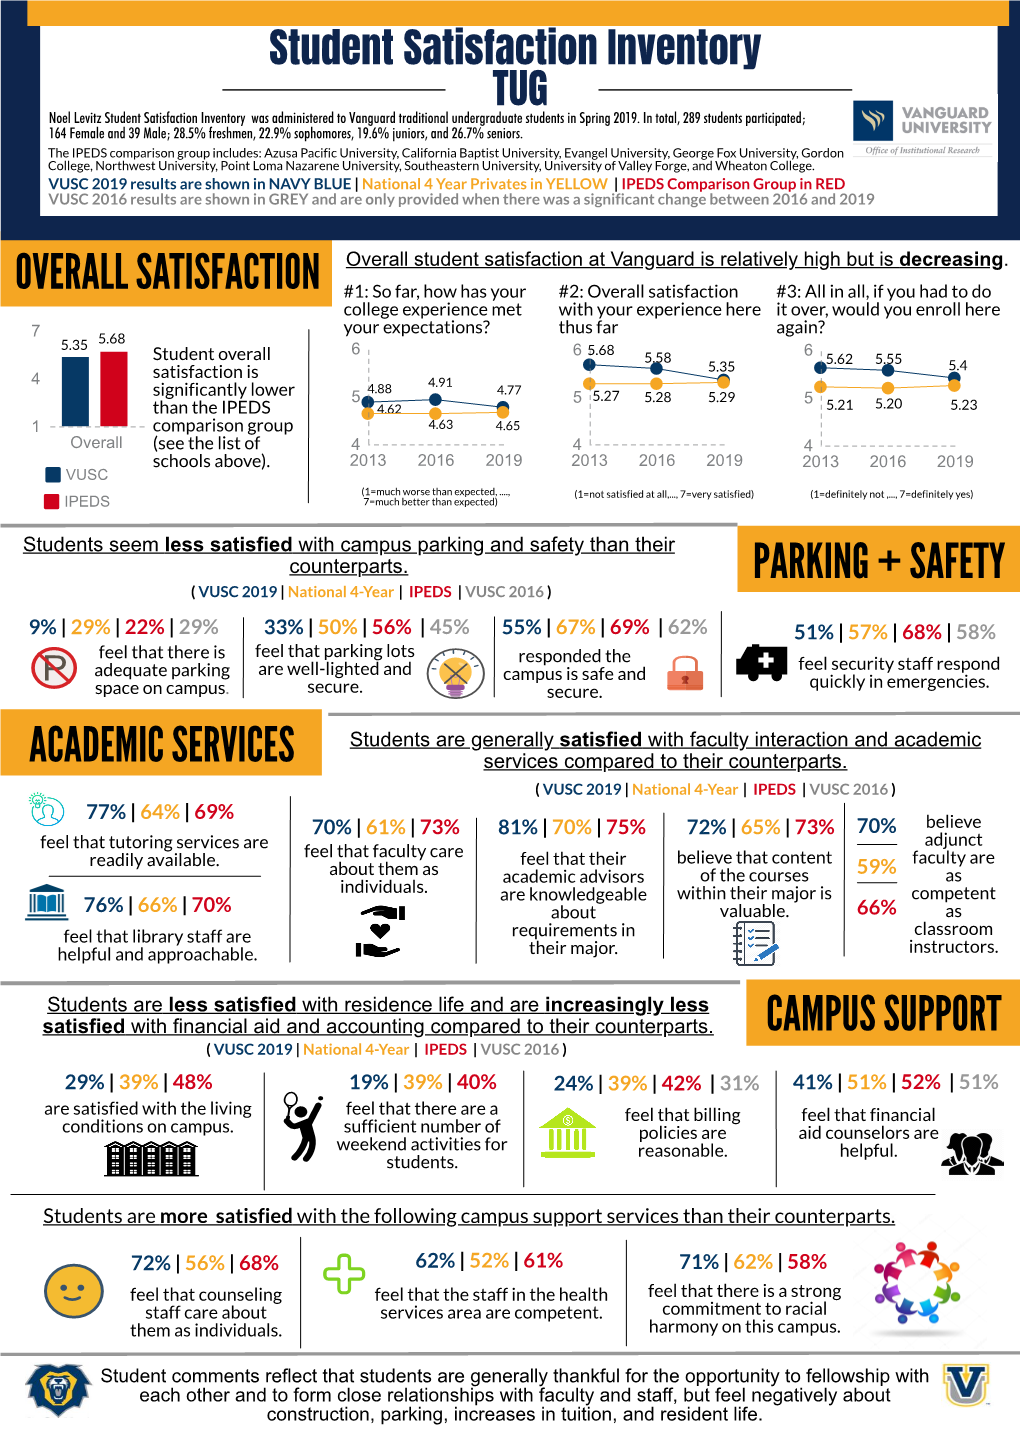 Overall Satisfaction Campus Support Academic Services Parking + Safety